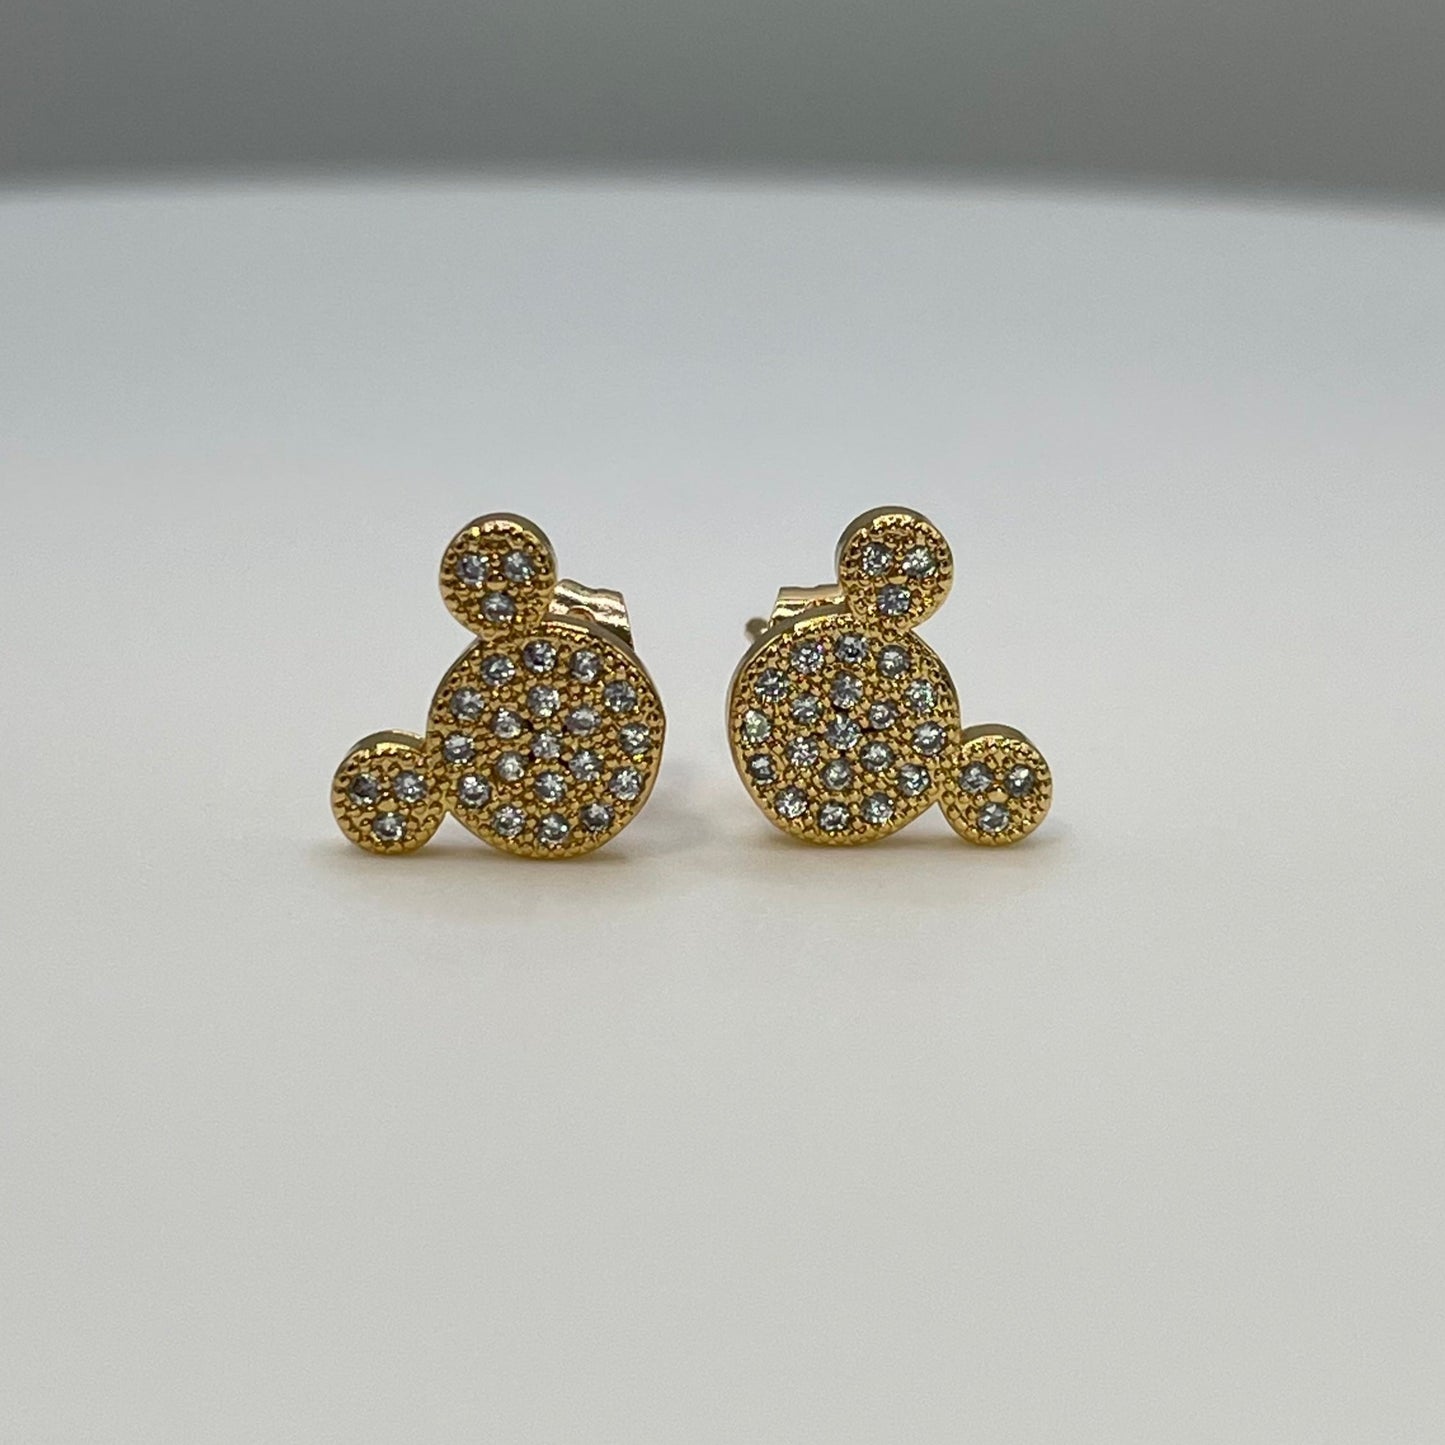 Mickey mouse earrings. Mickey mouse 18k gold plated earrings. Cute micke mouse stud earrings 18k gold plated. Disney mickey mouse earrings.